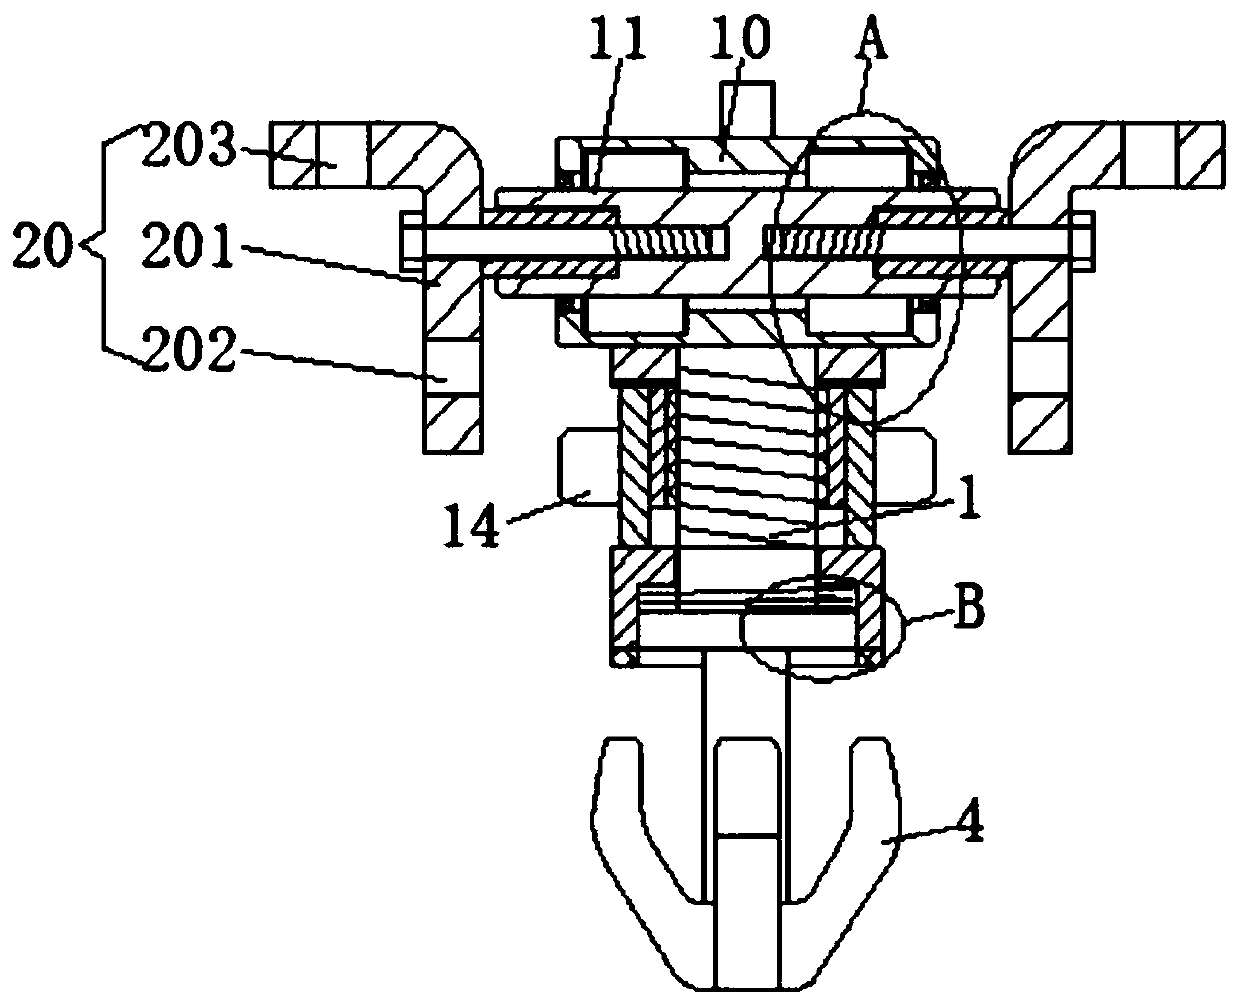 Fastener switching device for automobile wire harness